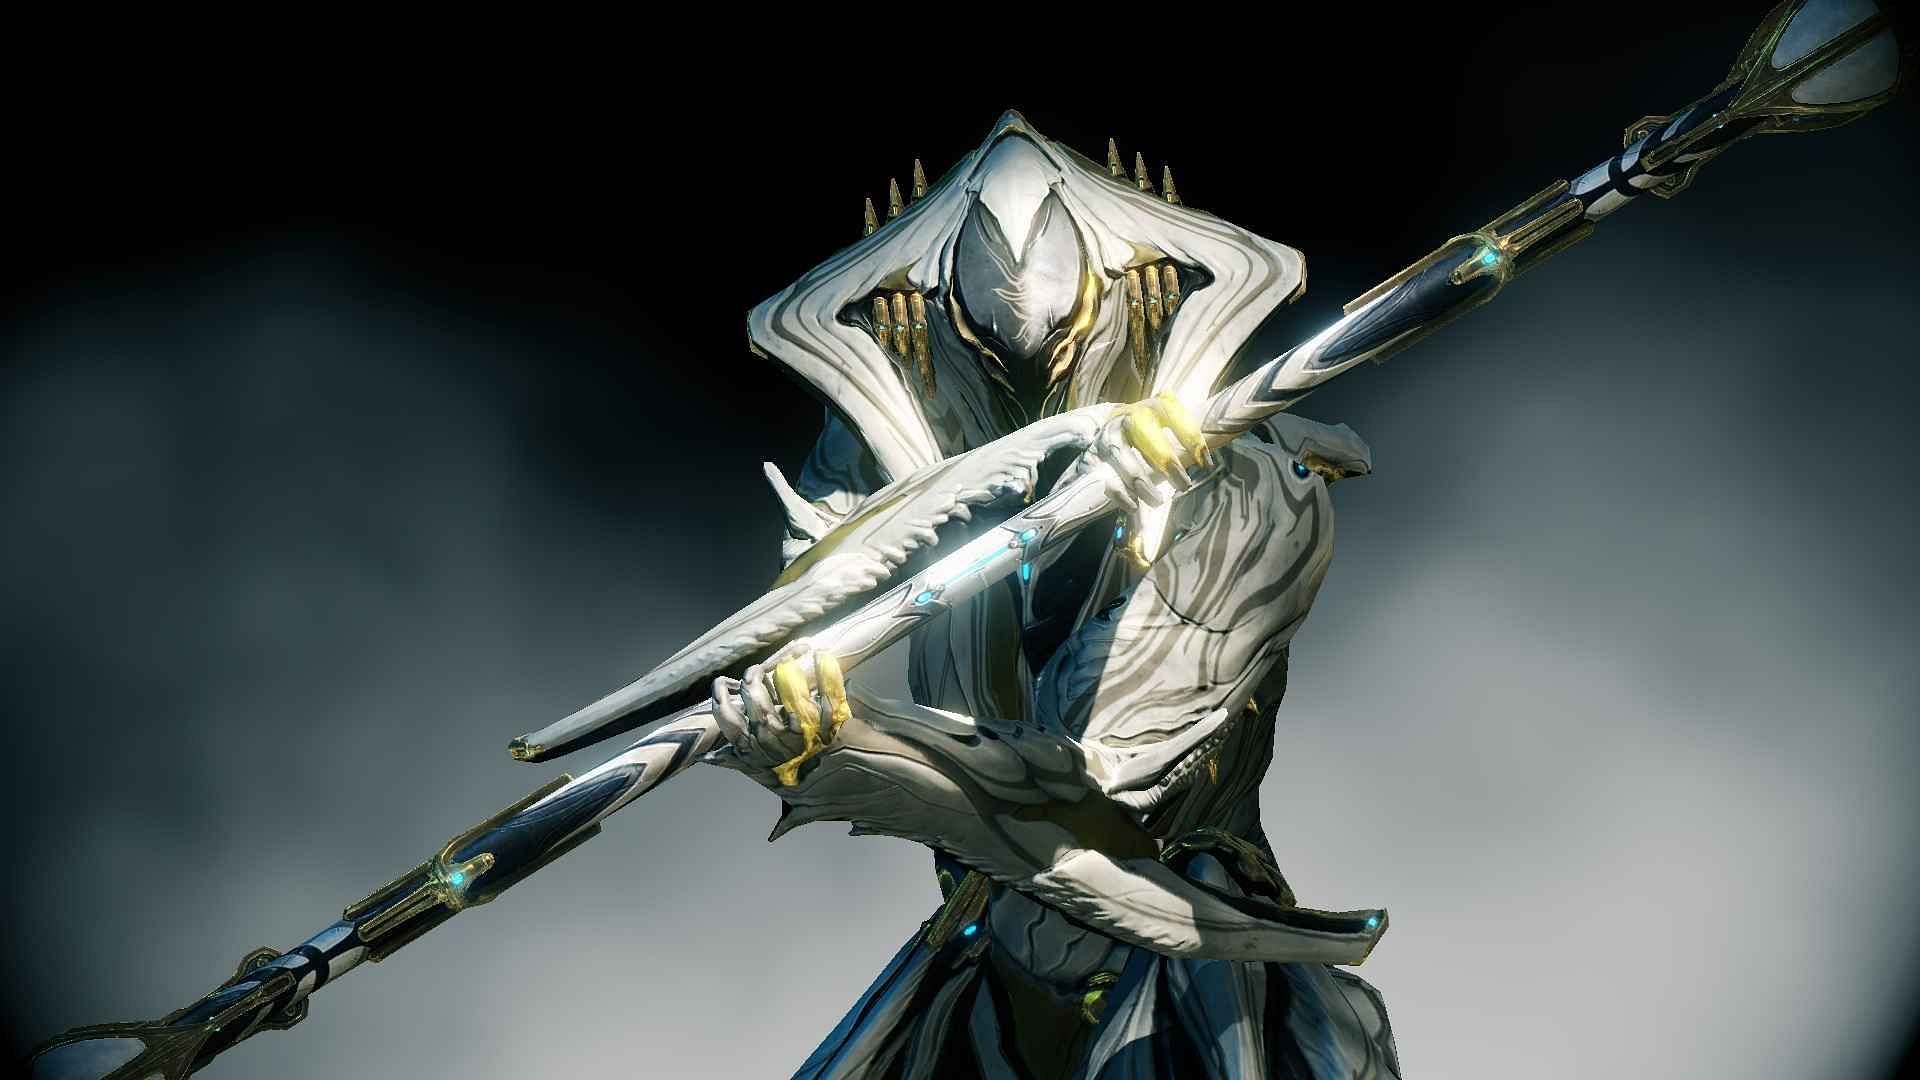 Loki is usually treated as a one-trick pony, only good for evading detection. (Image via Digital Extremes)